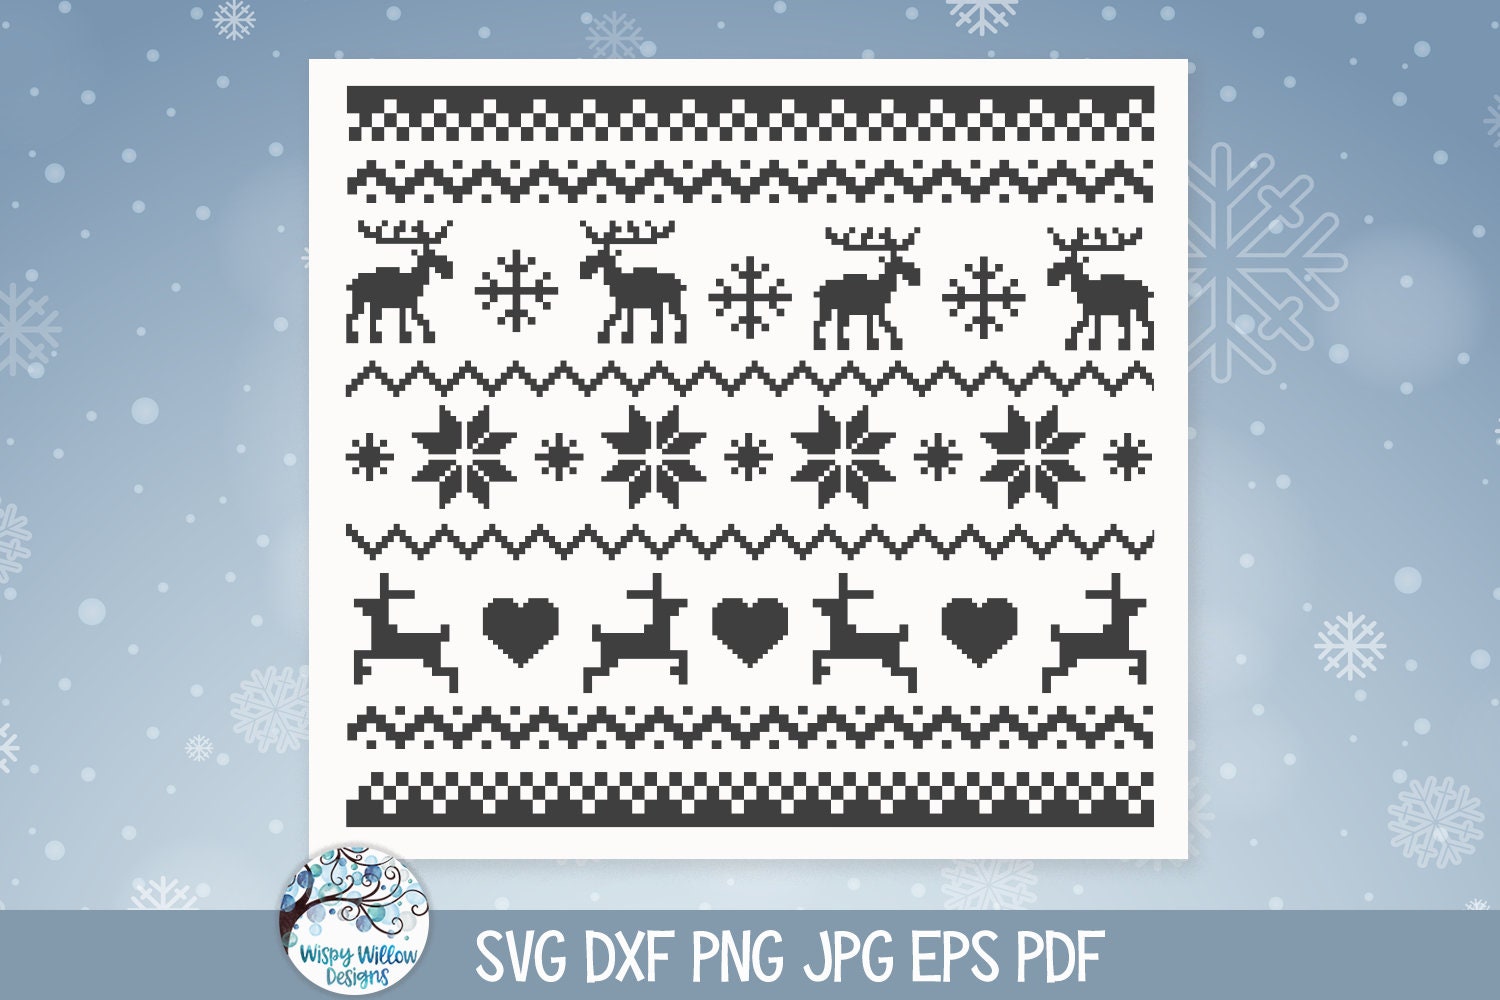 Penguin Ugly Christmas Sweater Design SVG Files – CraftDrawings